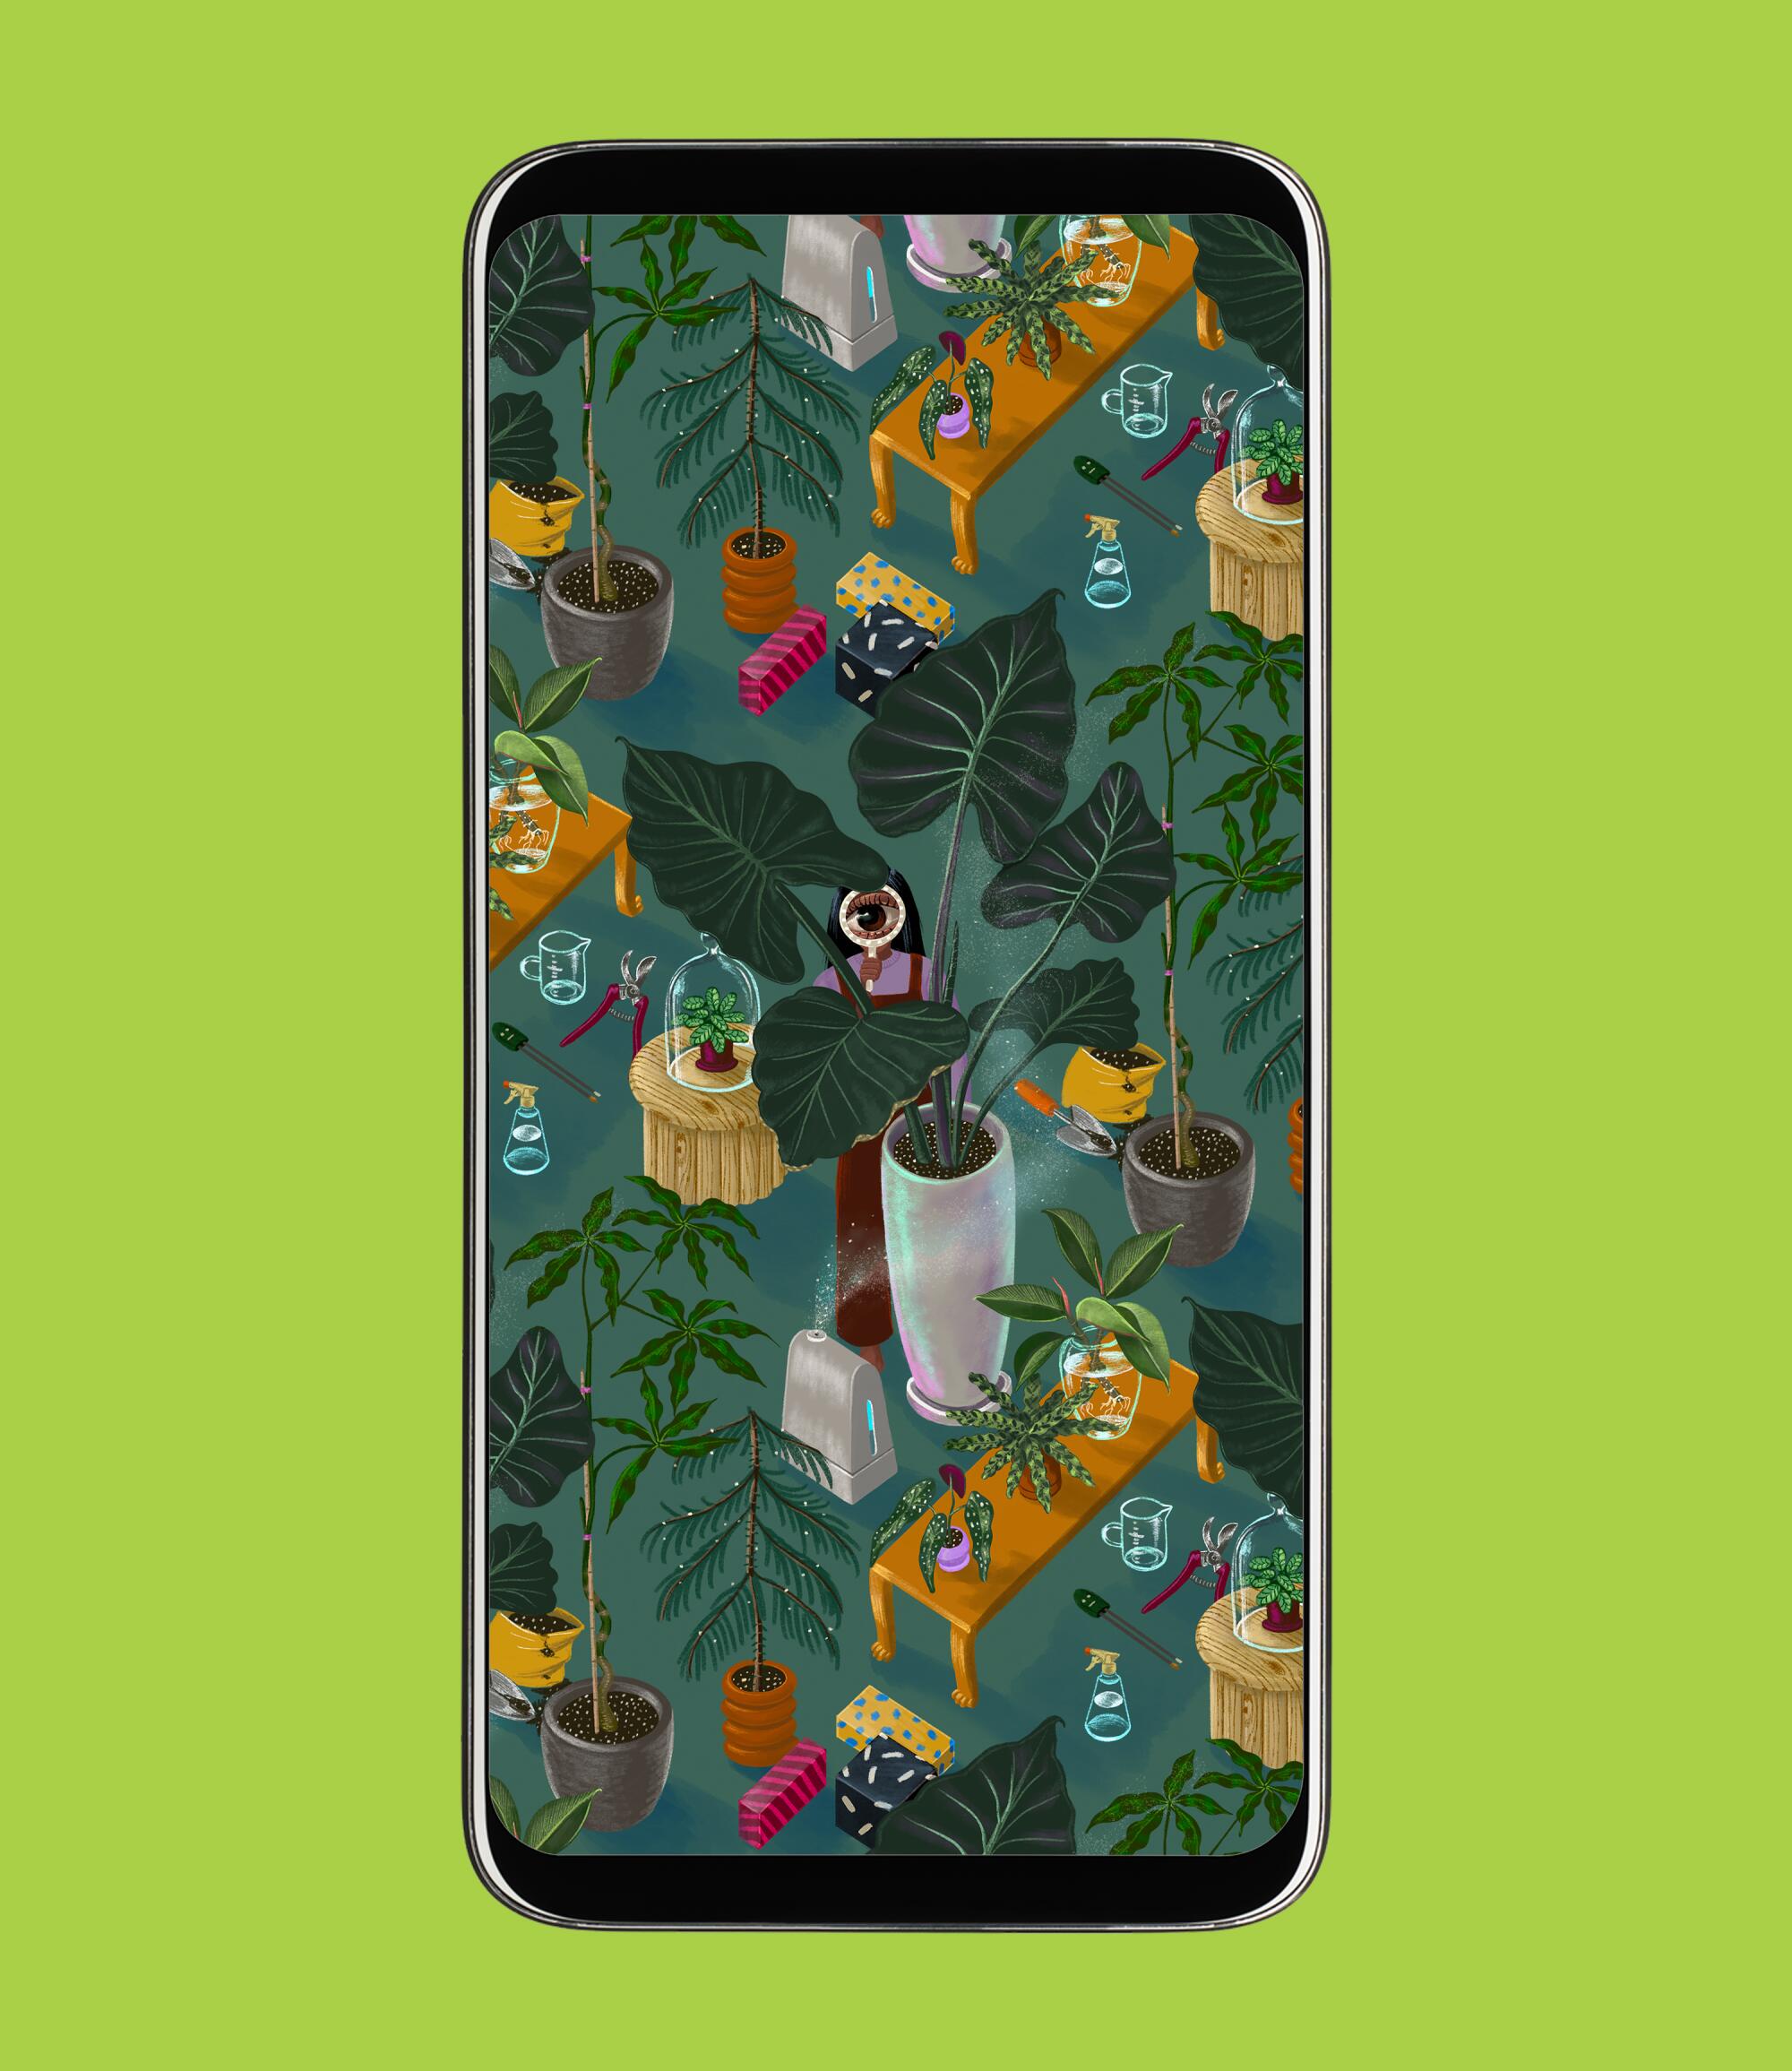 Mockup of a phone background with a plants illustration.